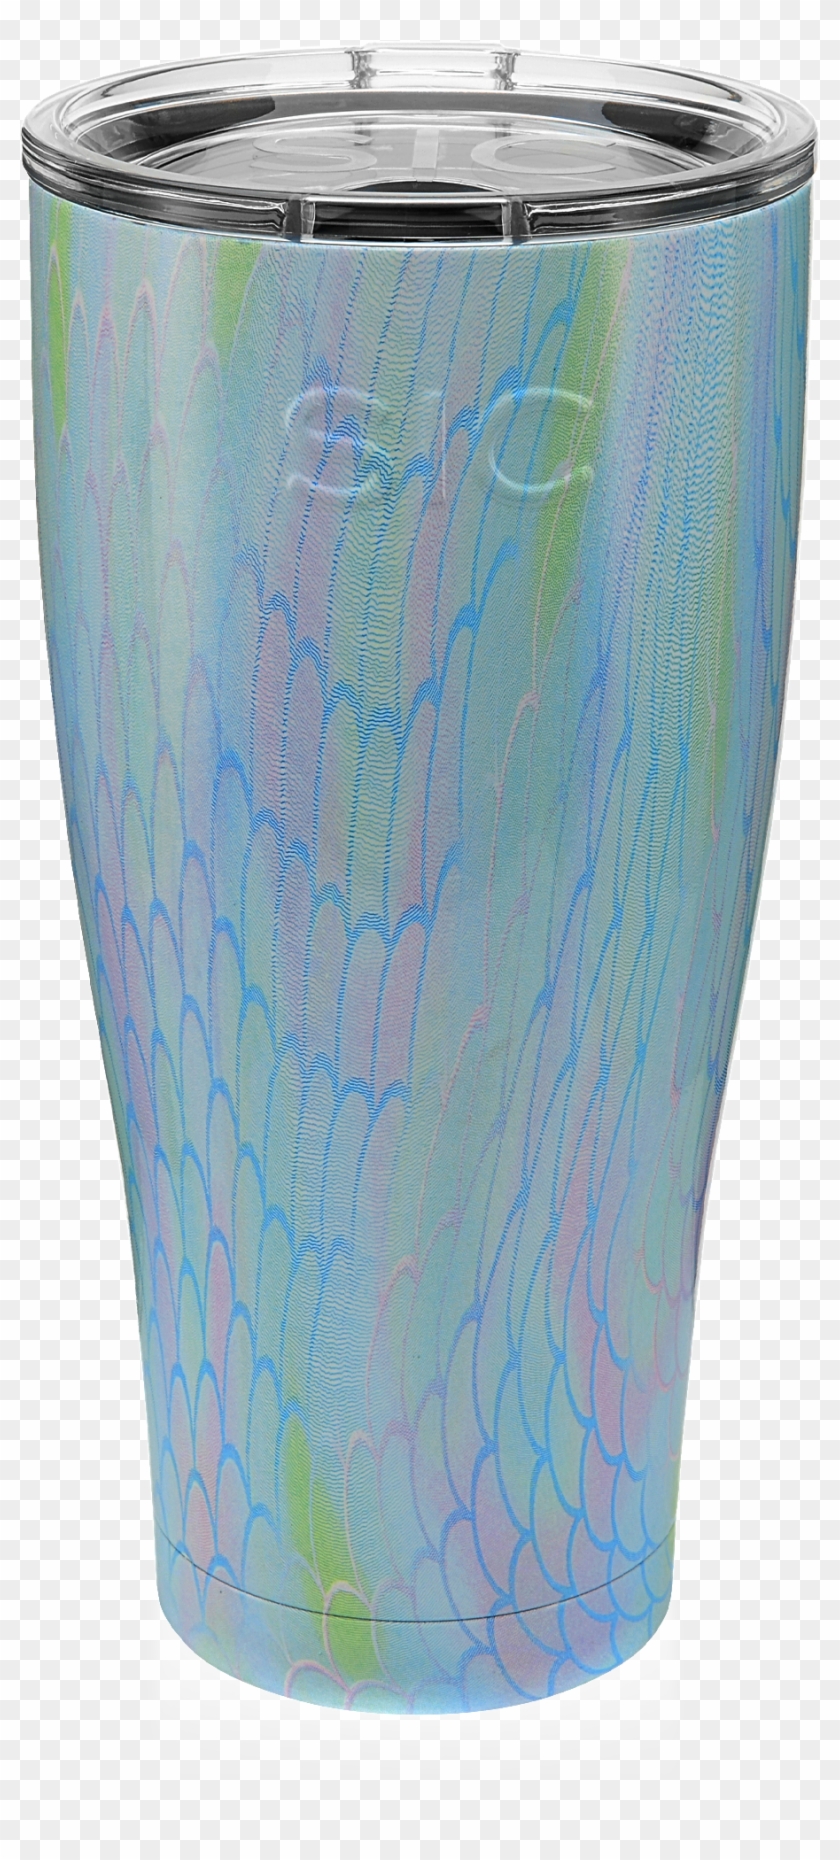 Mermaid Scales Png Transparent Background - Vase Clipart #3011106